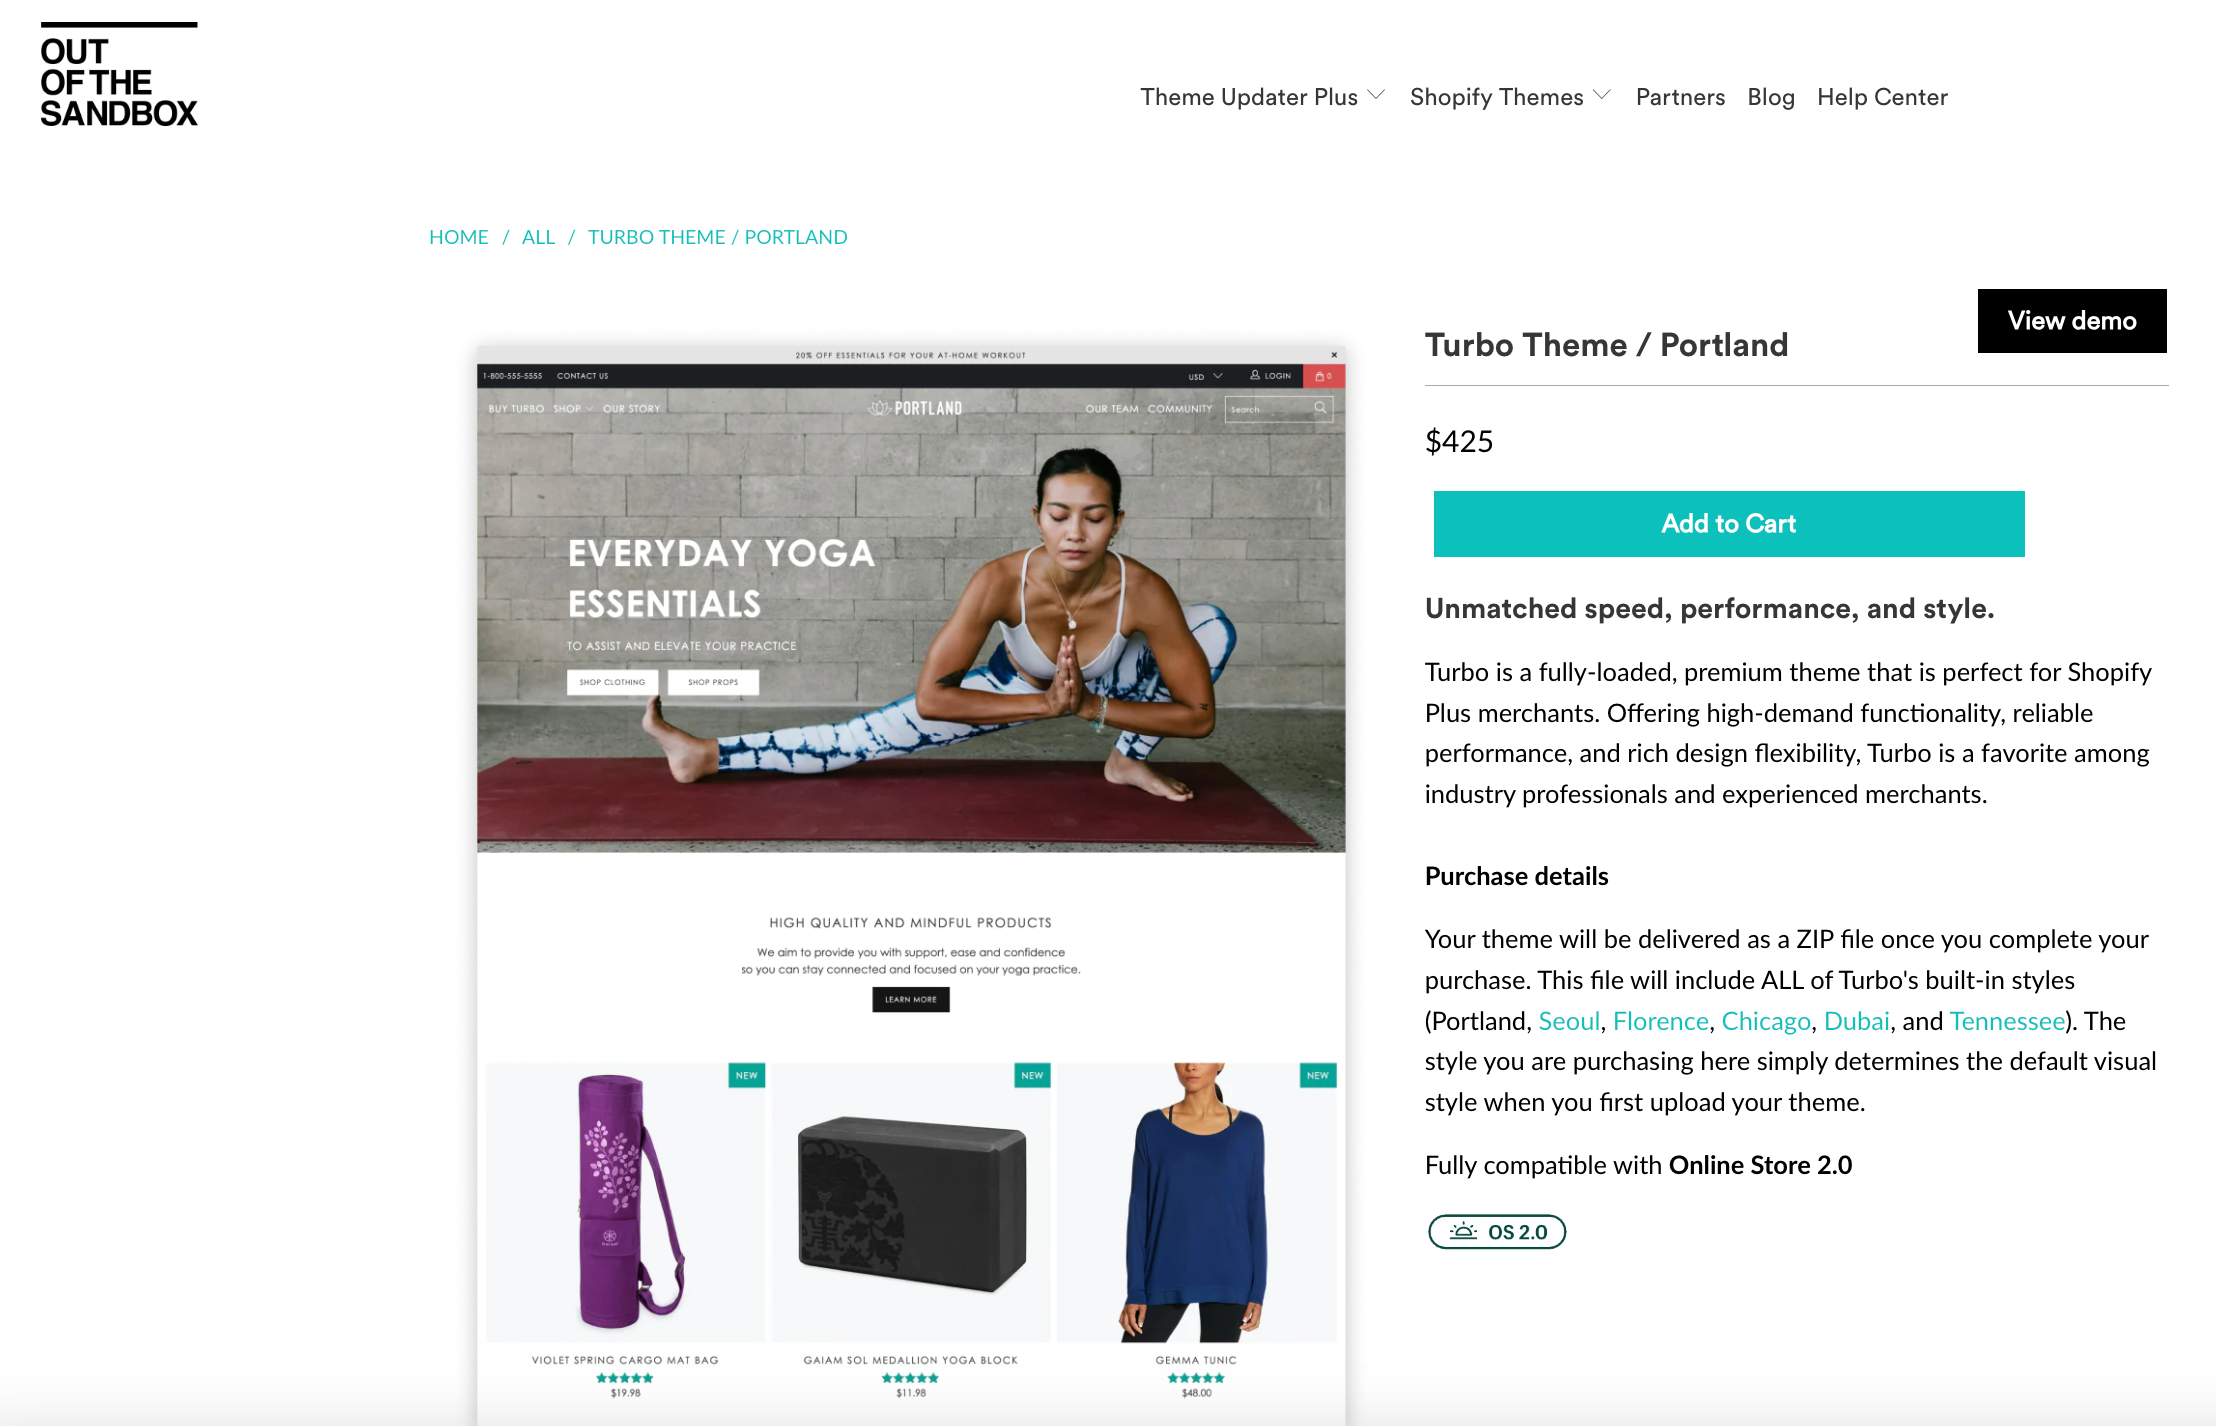 How to Purchase the Turbo Shopify Theme